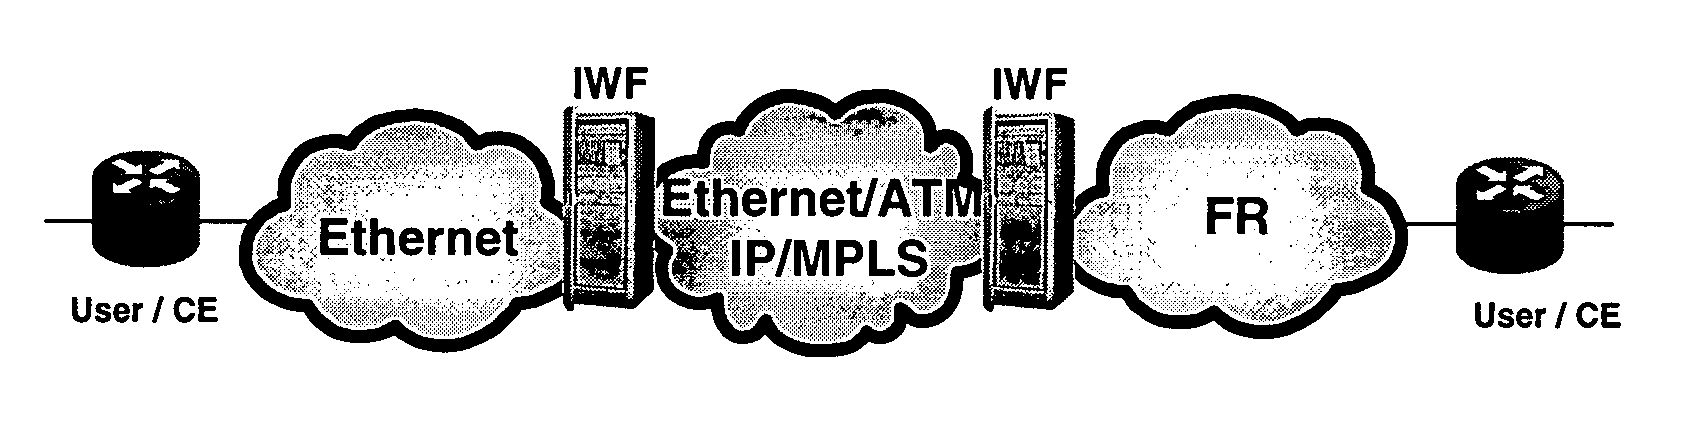 Ethernet to frame relay interworking with multiple quality of service levels